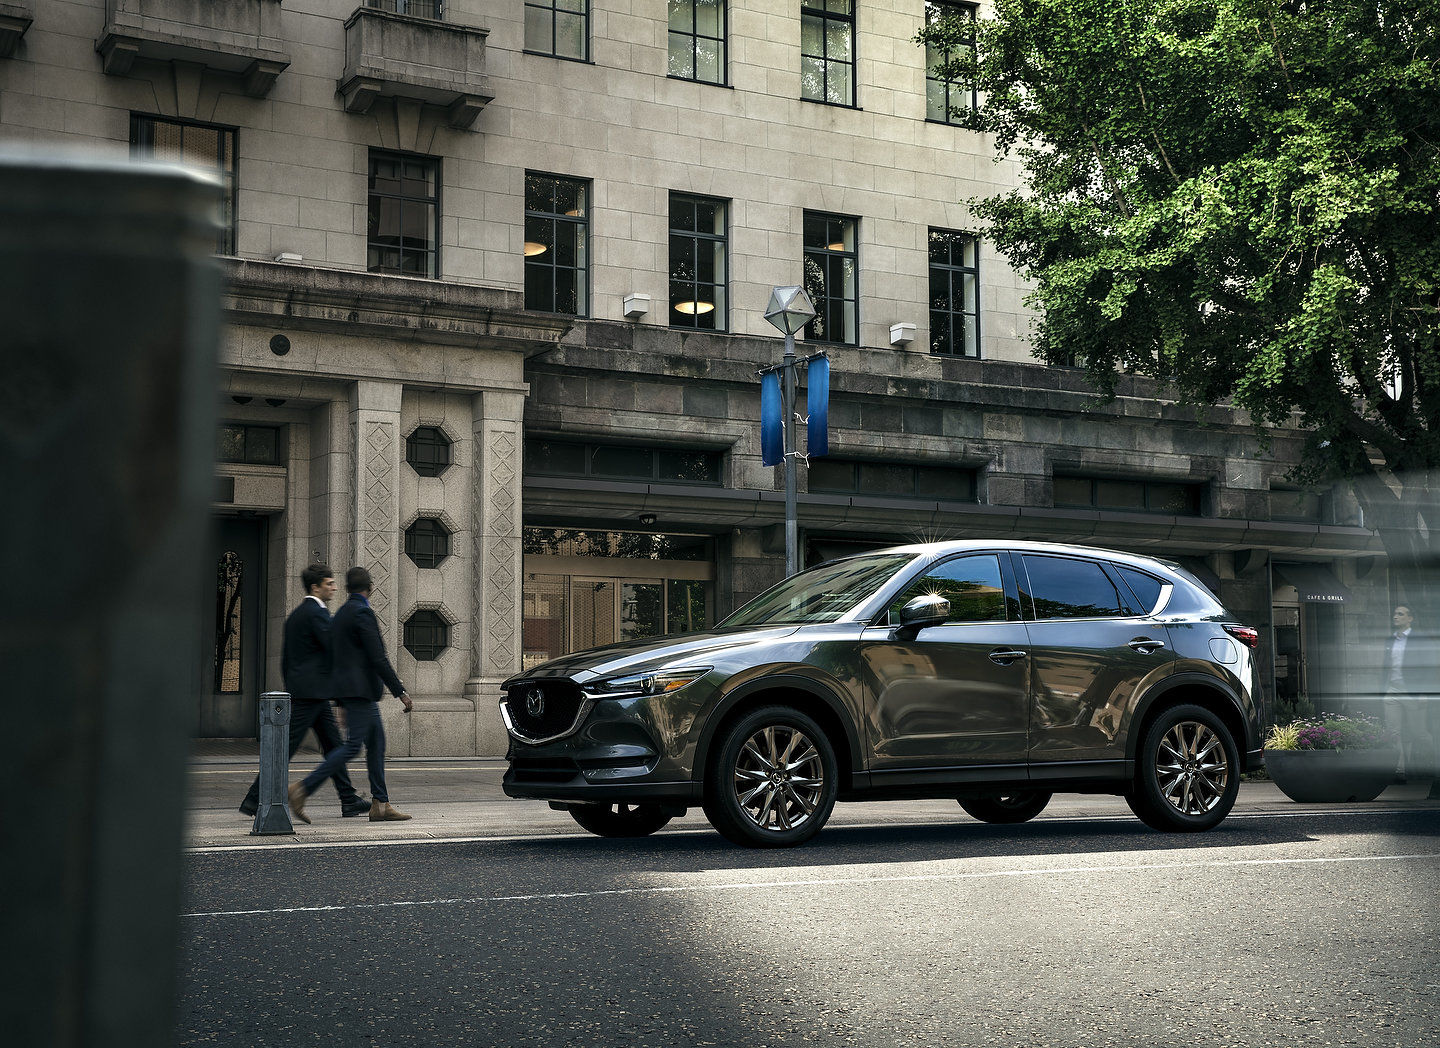 The 2019 Mazda CX-5 Signature has the luxury you want